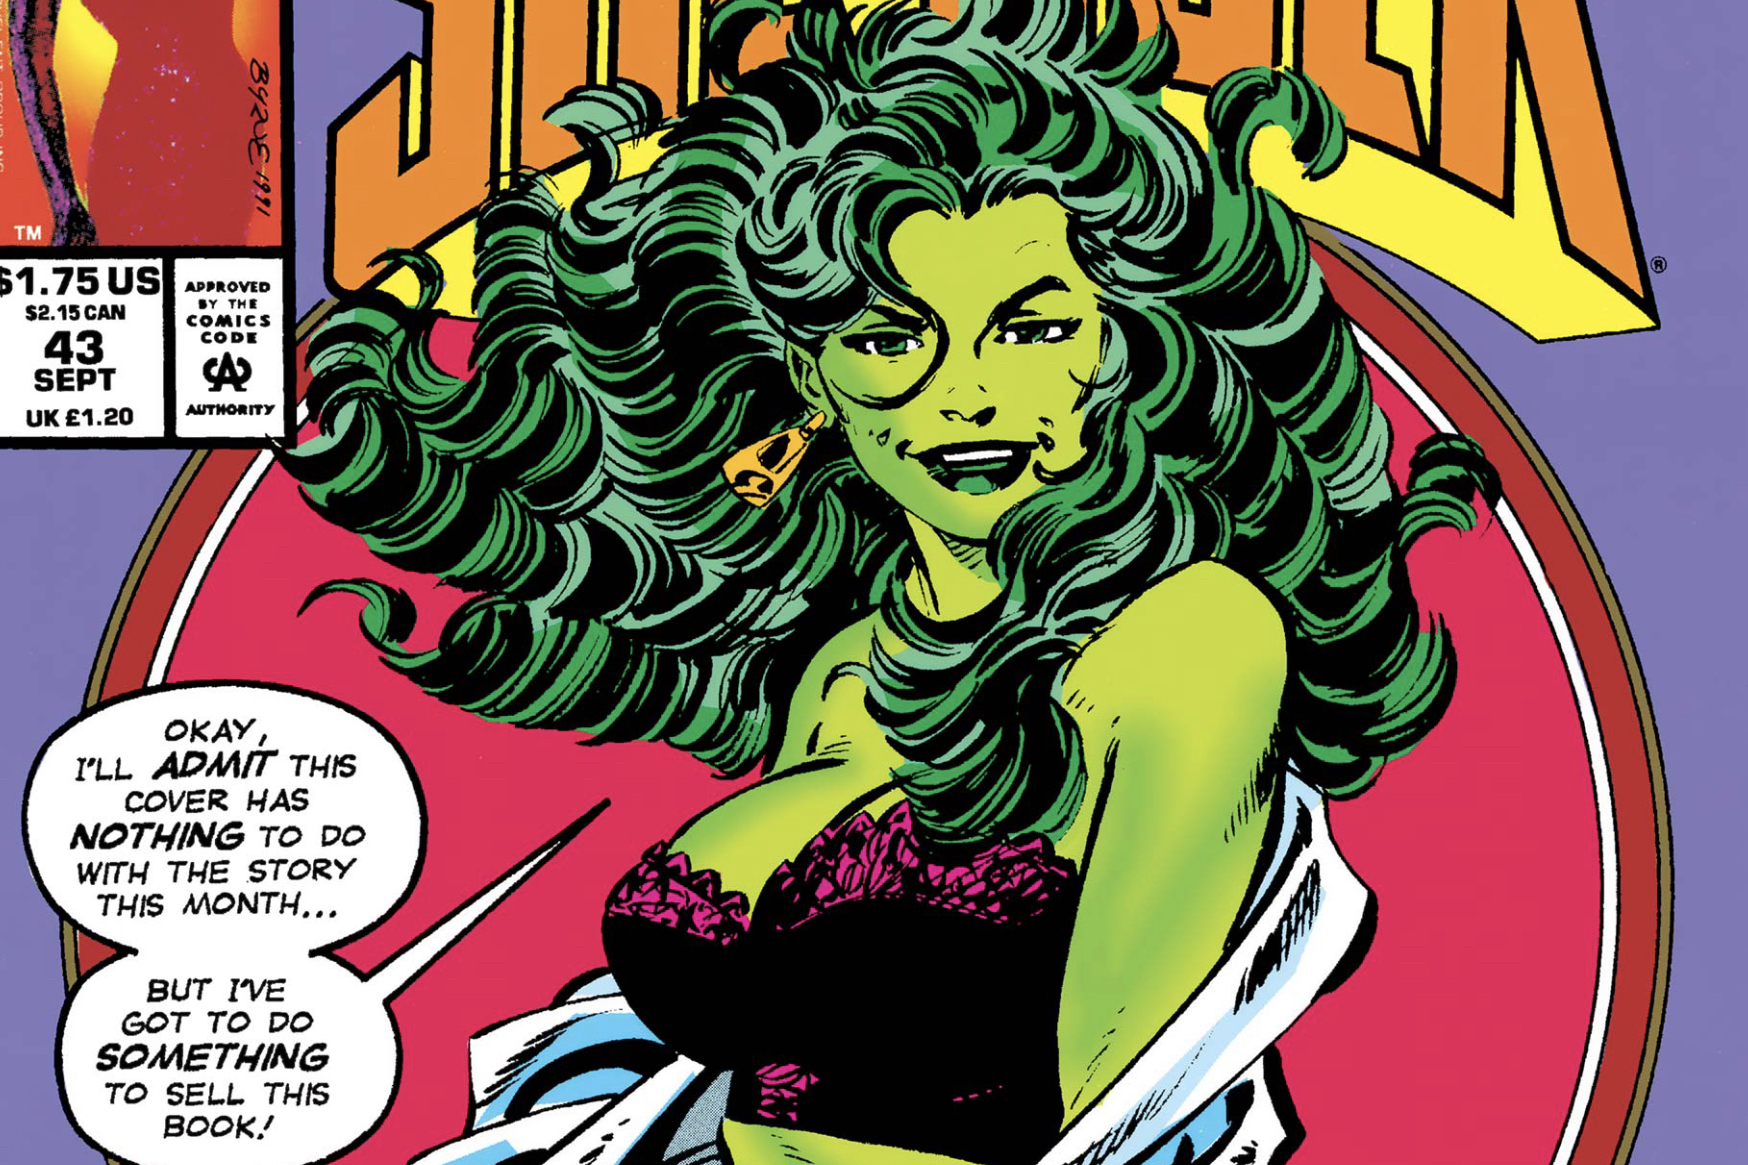 She-Hulk pulls open her button down to reveal her lacy bra on the cover of The Sensational She-Hulk #43 (1992). “Okay, I’ll admit this cover has nothing to do with the story this month... but I’ve got to do something to sell this book!” she says, grinning.